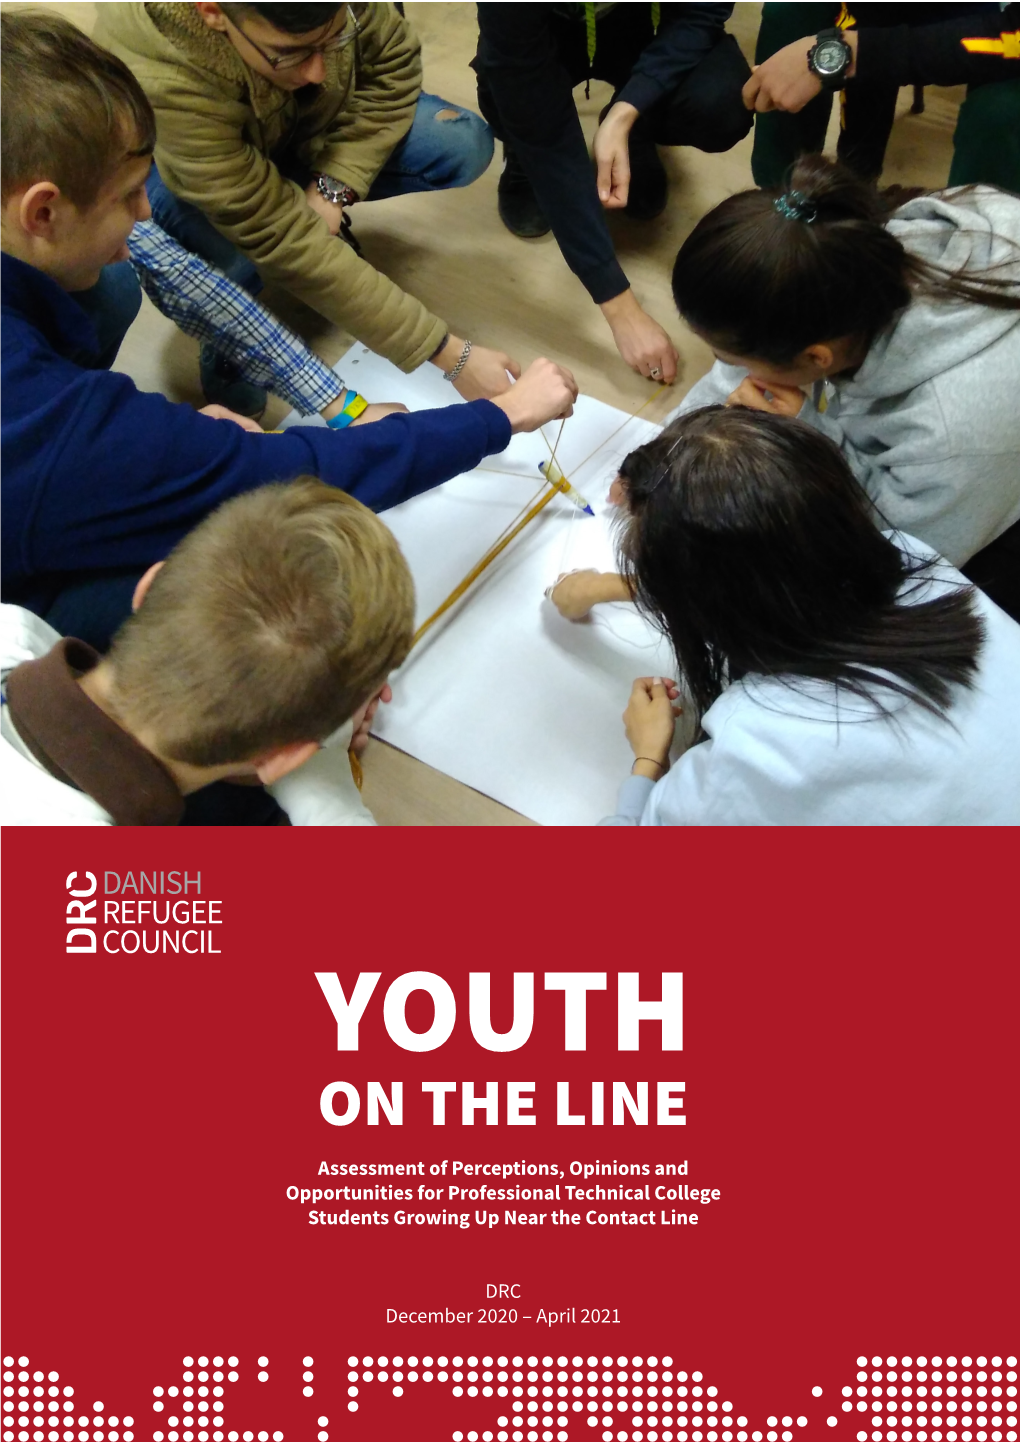 ON the LINE Assessment of Perceptions, Opinions and Opportunities for Professional Technical College Students Growing up Near the Contact Line